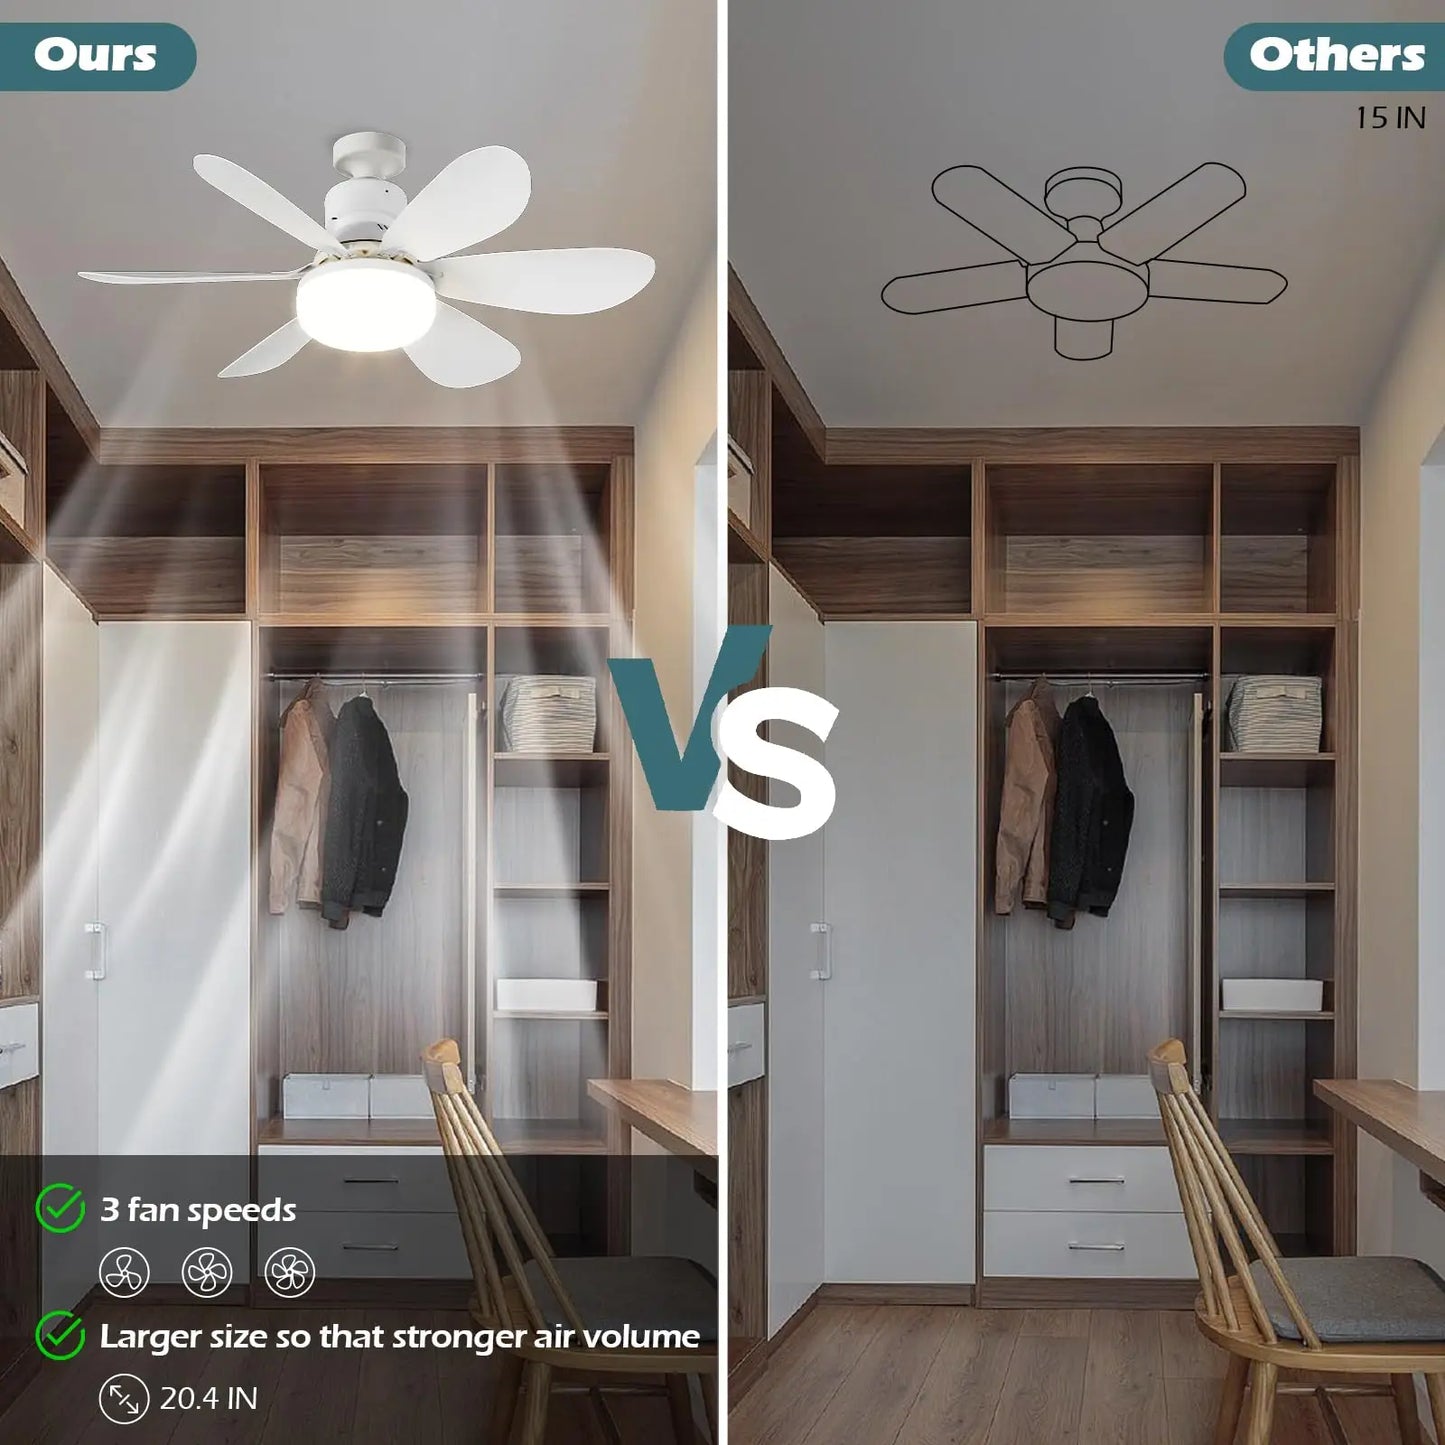 Remote-Controlled LED Ceiling Fan Light for Living Spaces